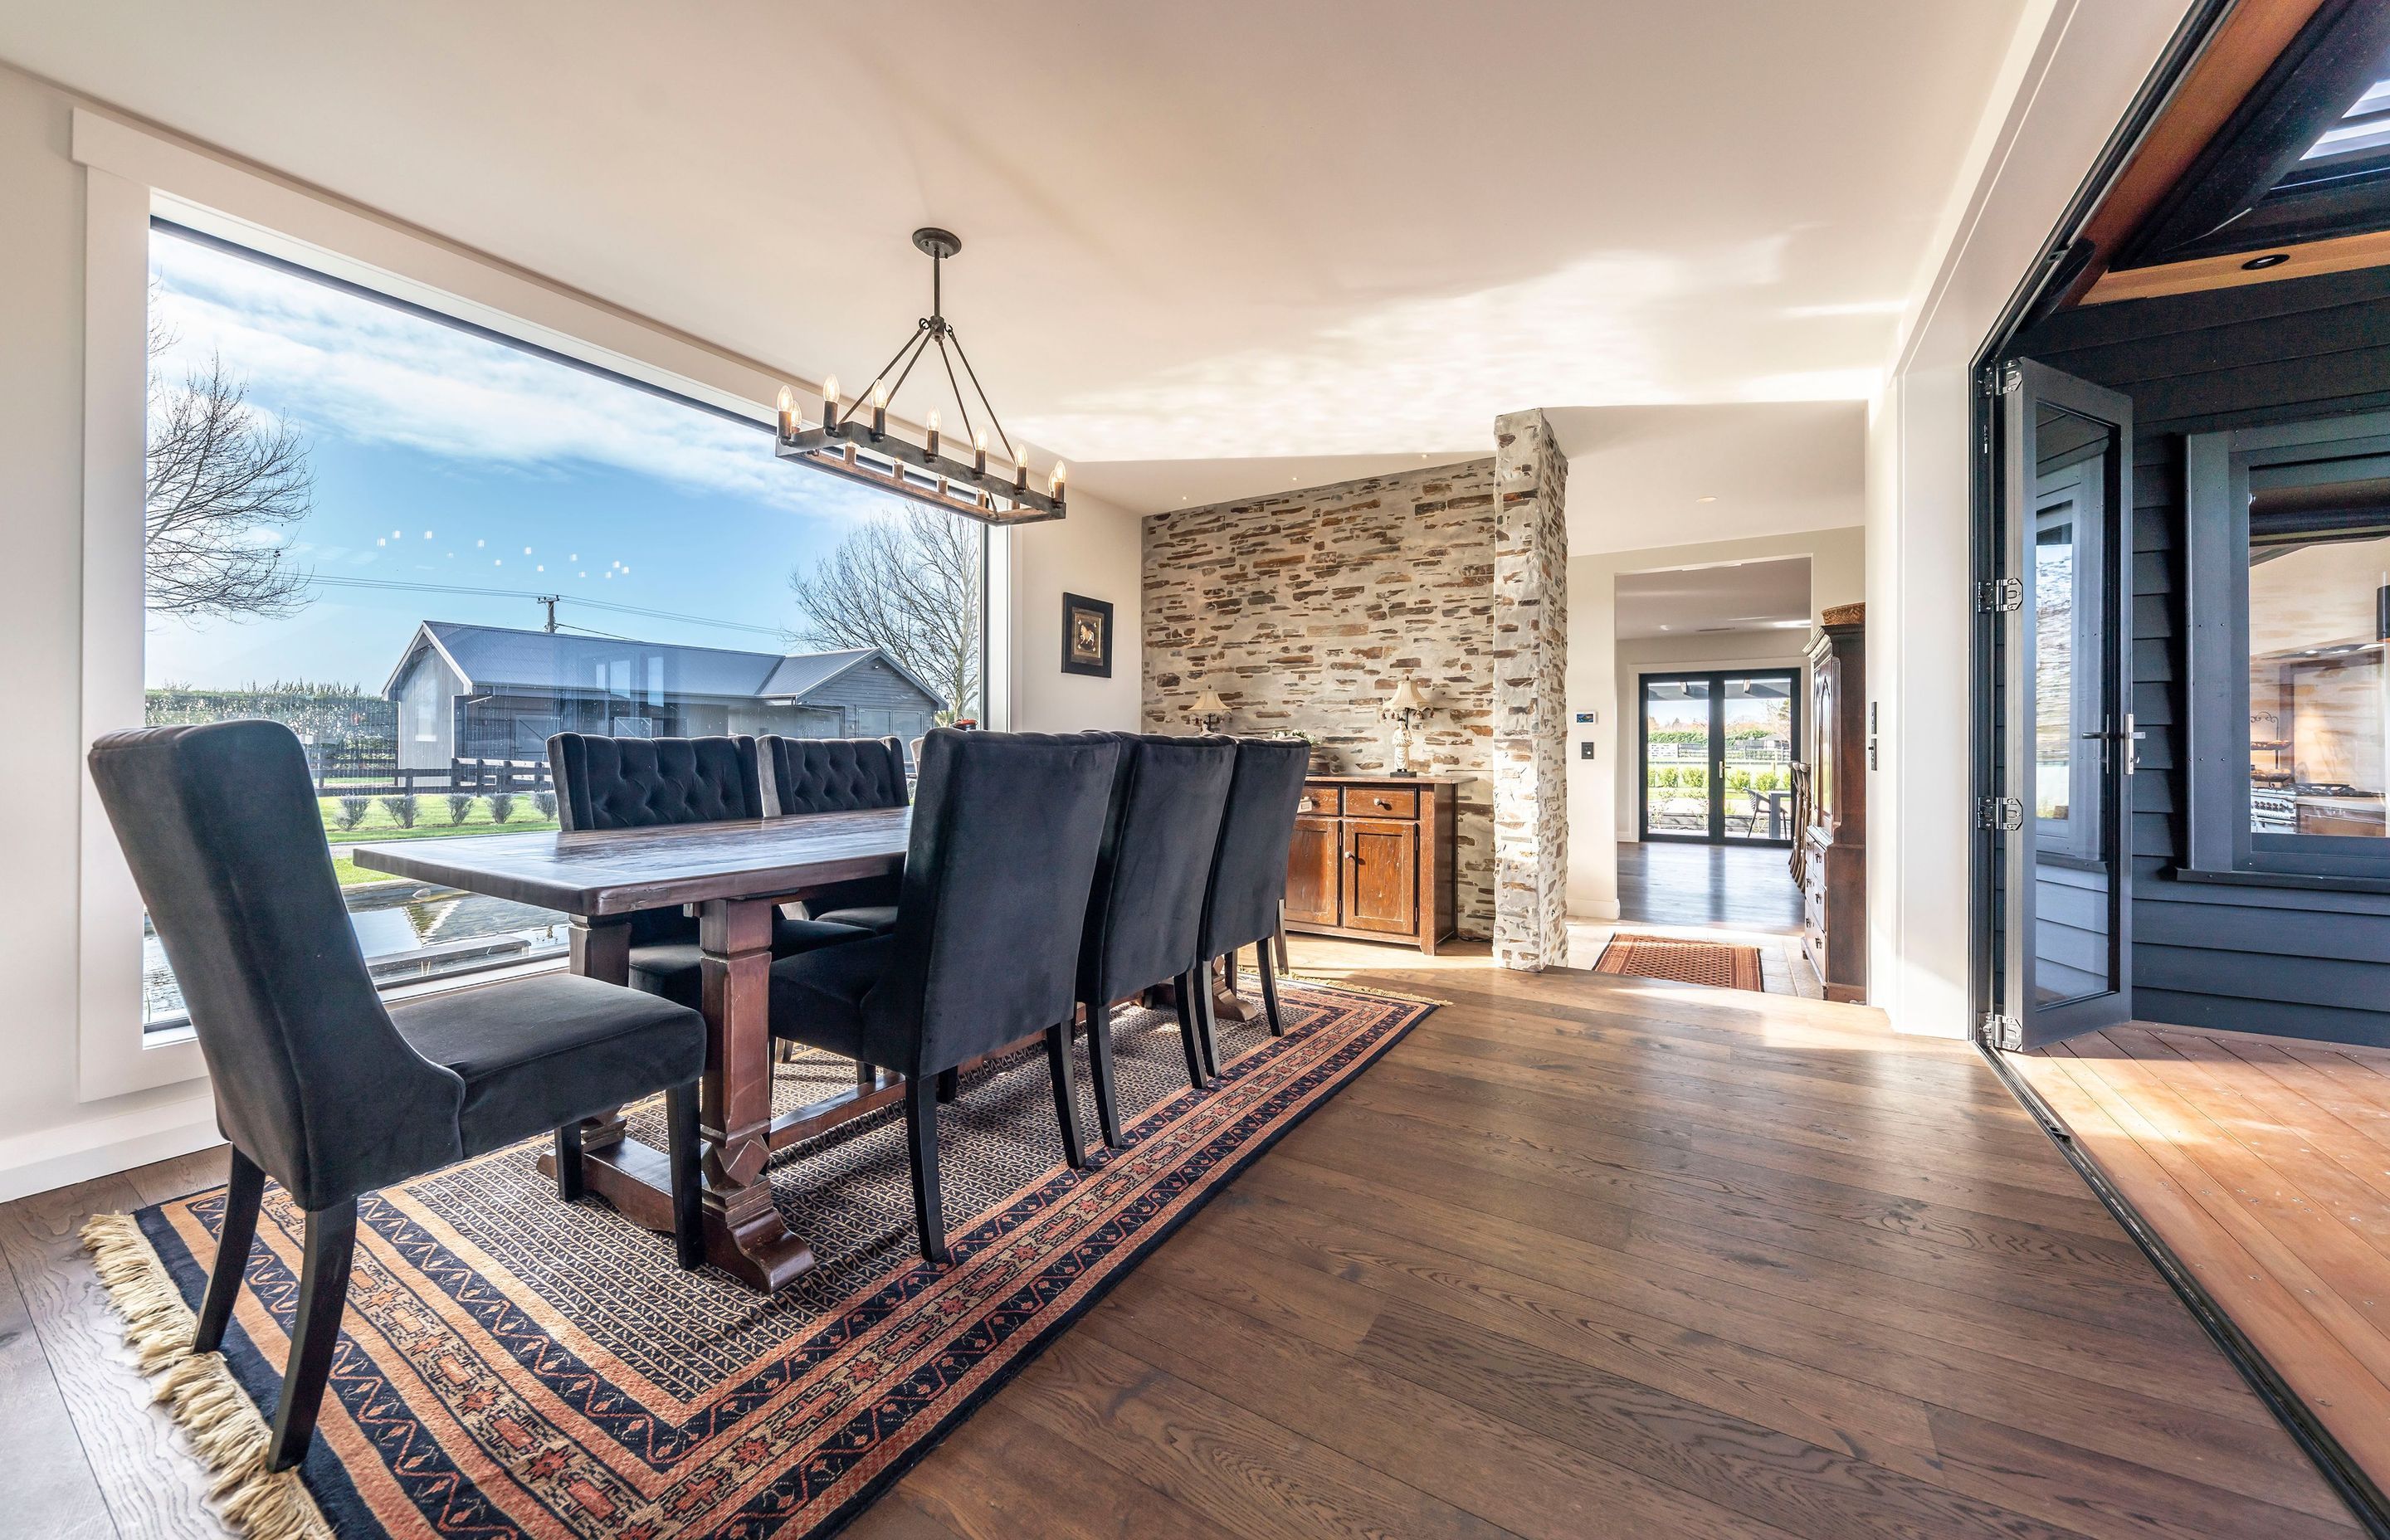 The formal dining area enjoys an elevated position with views over the pond through the large, plate glass window on one side and access to the external entertaining area on the other.